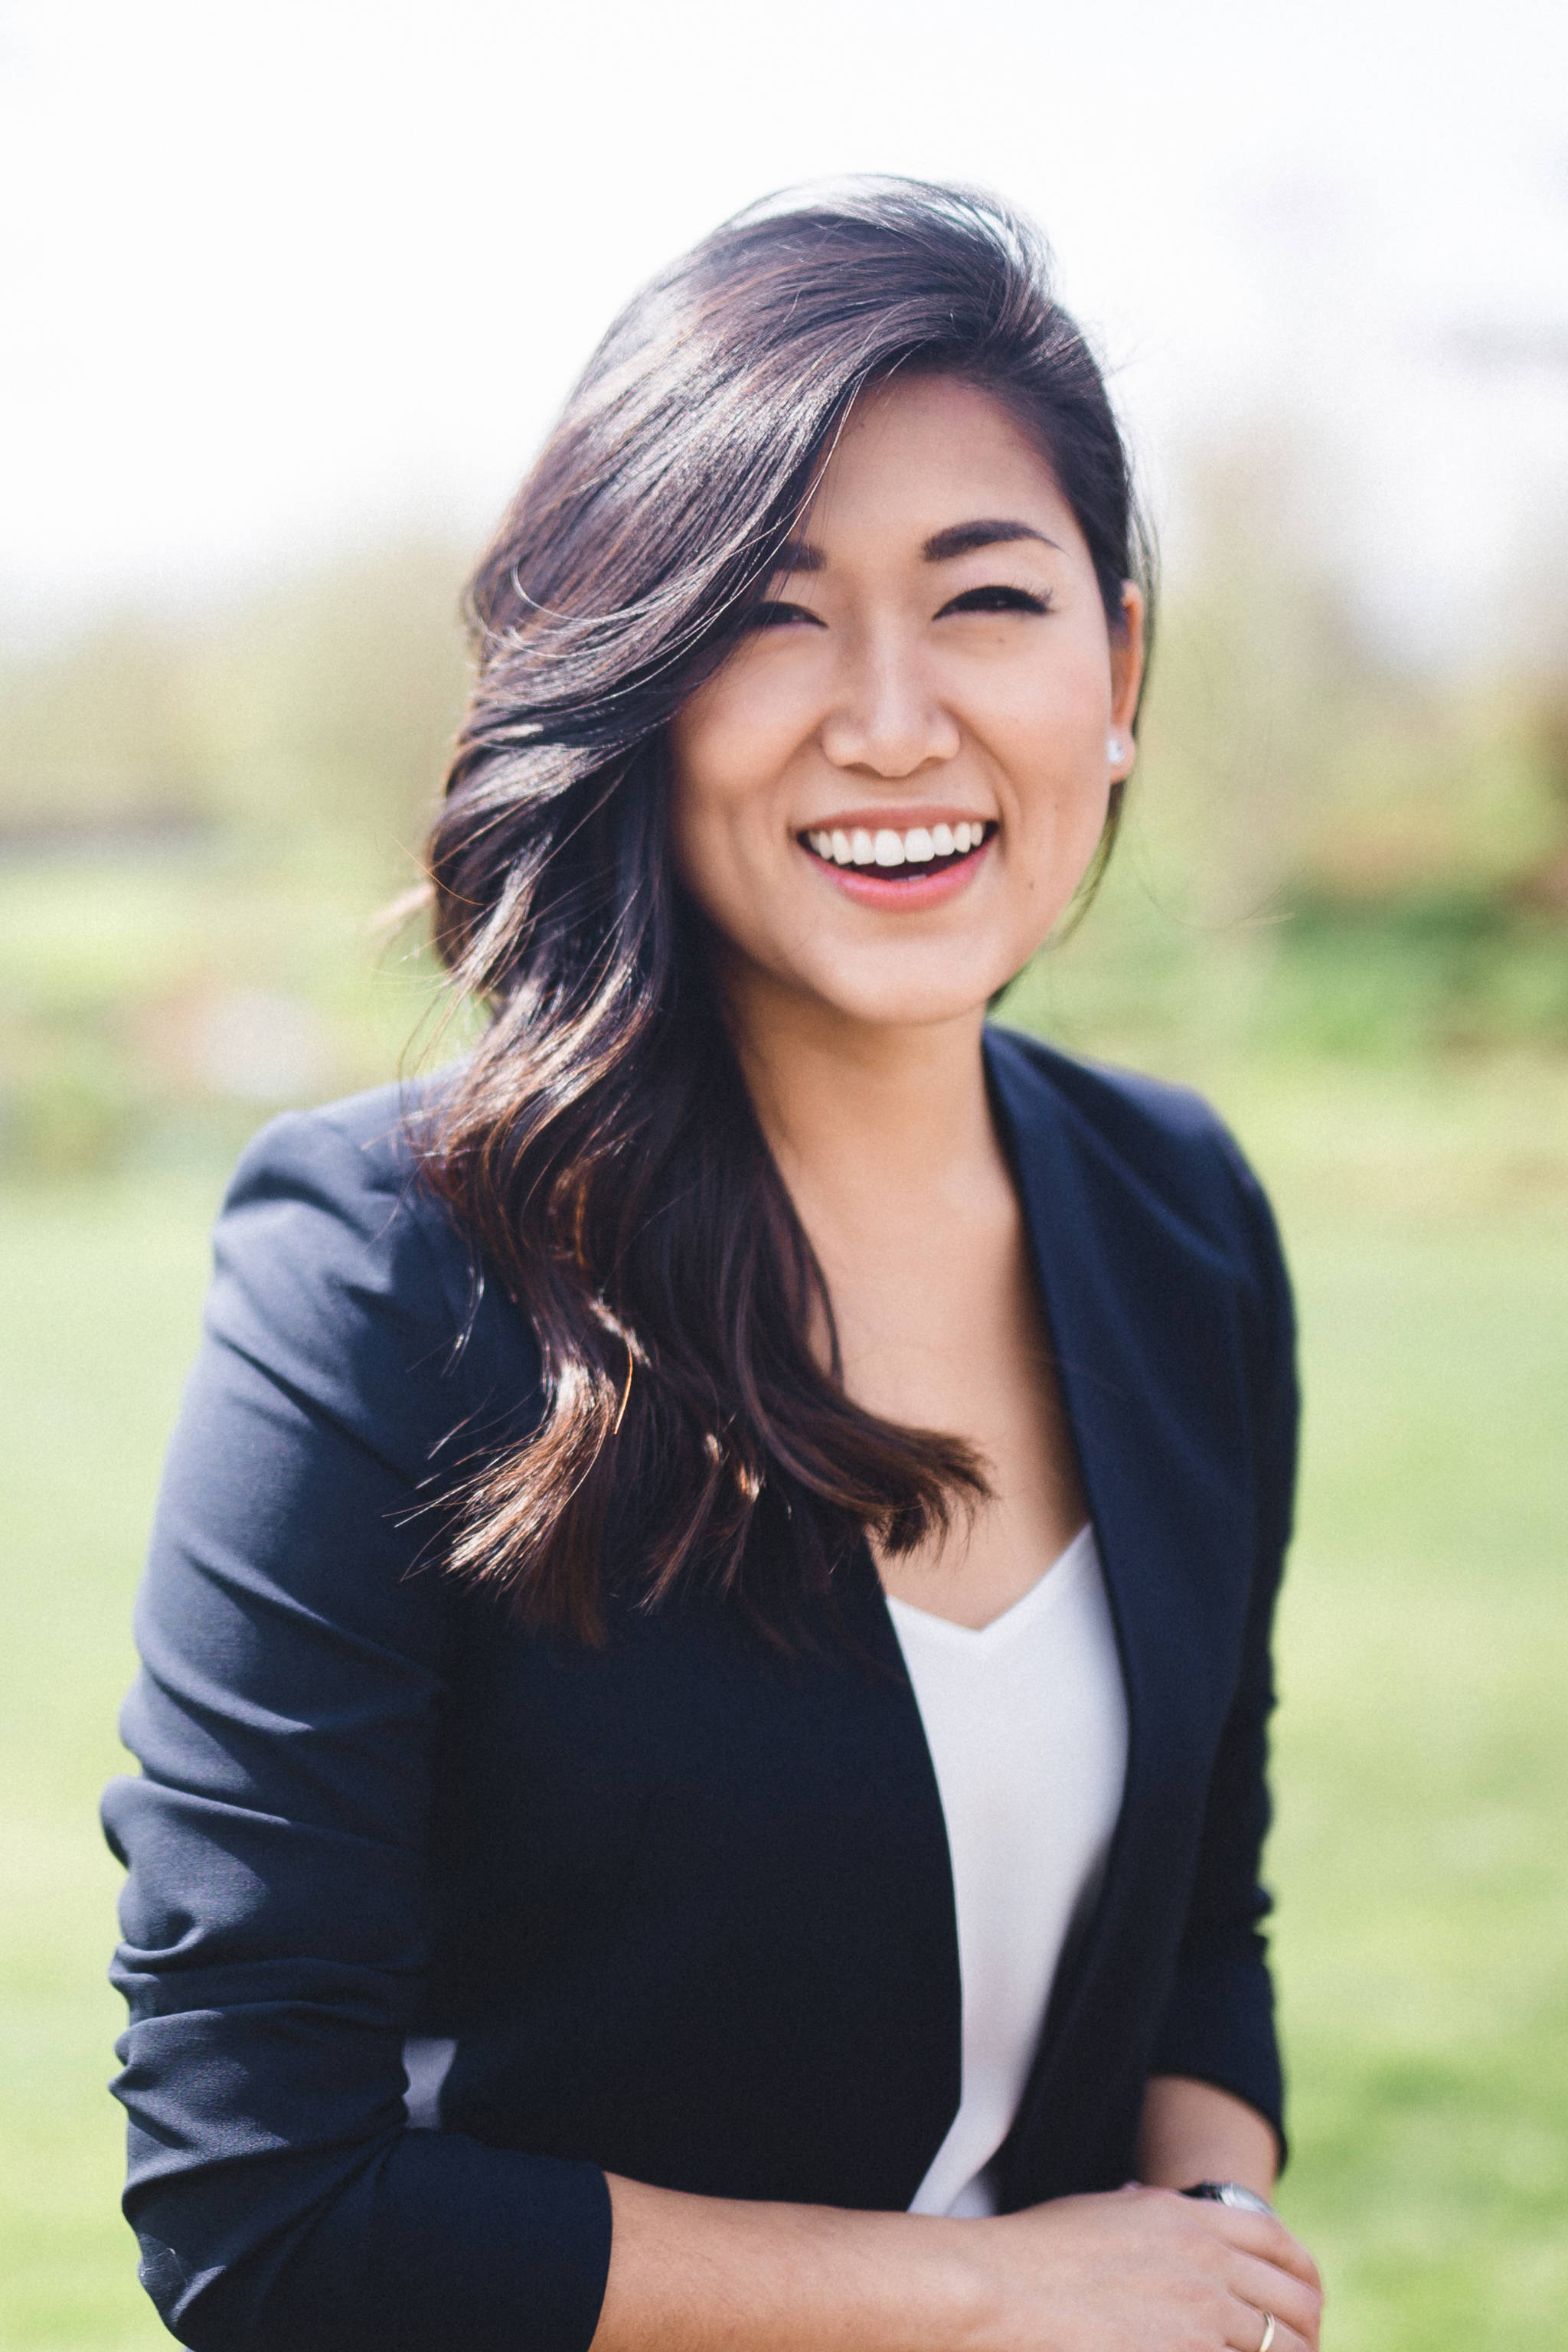 Jinyoung Lee Englund of Woodinville is running for the 45th Legislative District State Senate seat. Courtesy of GH Kim Photography